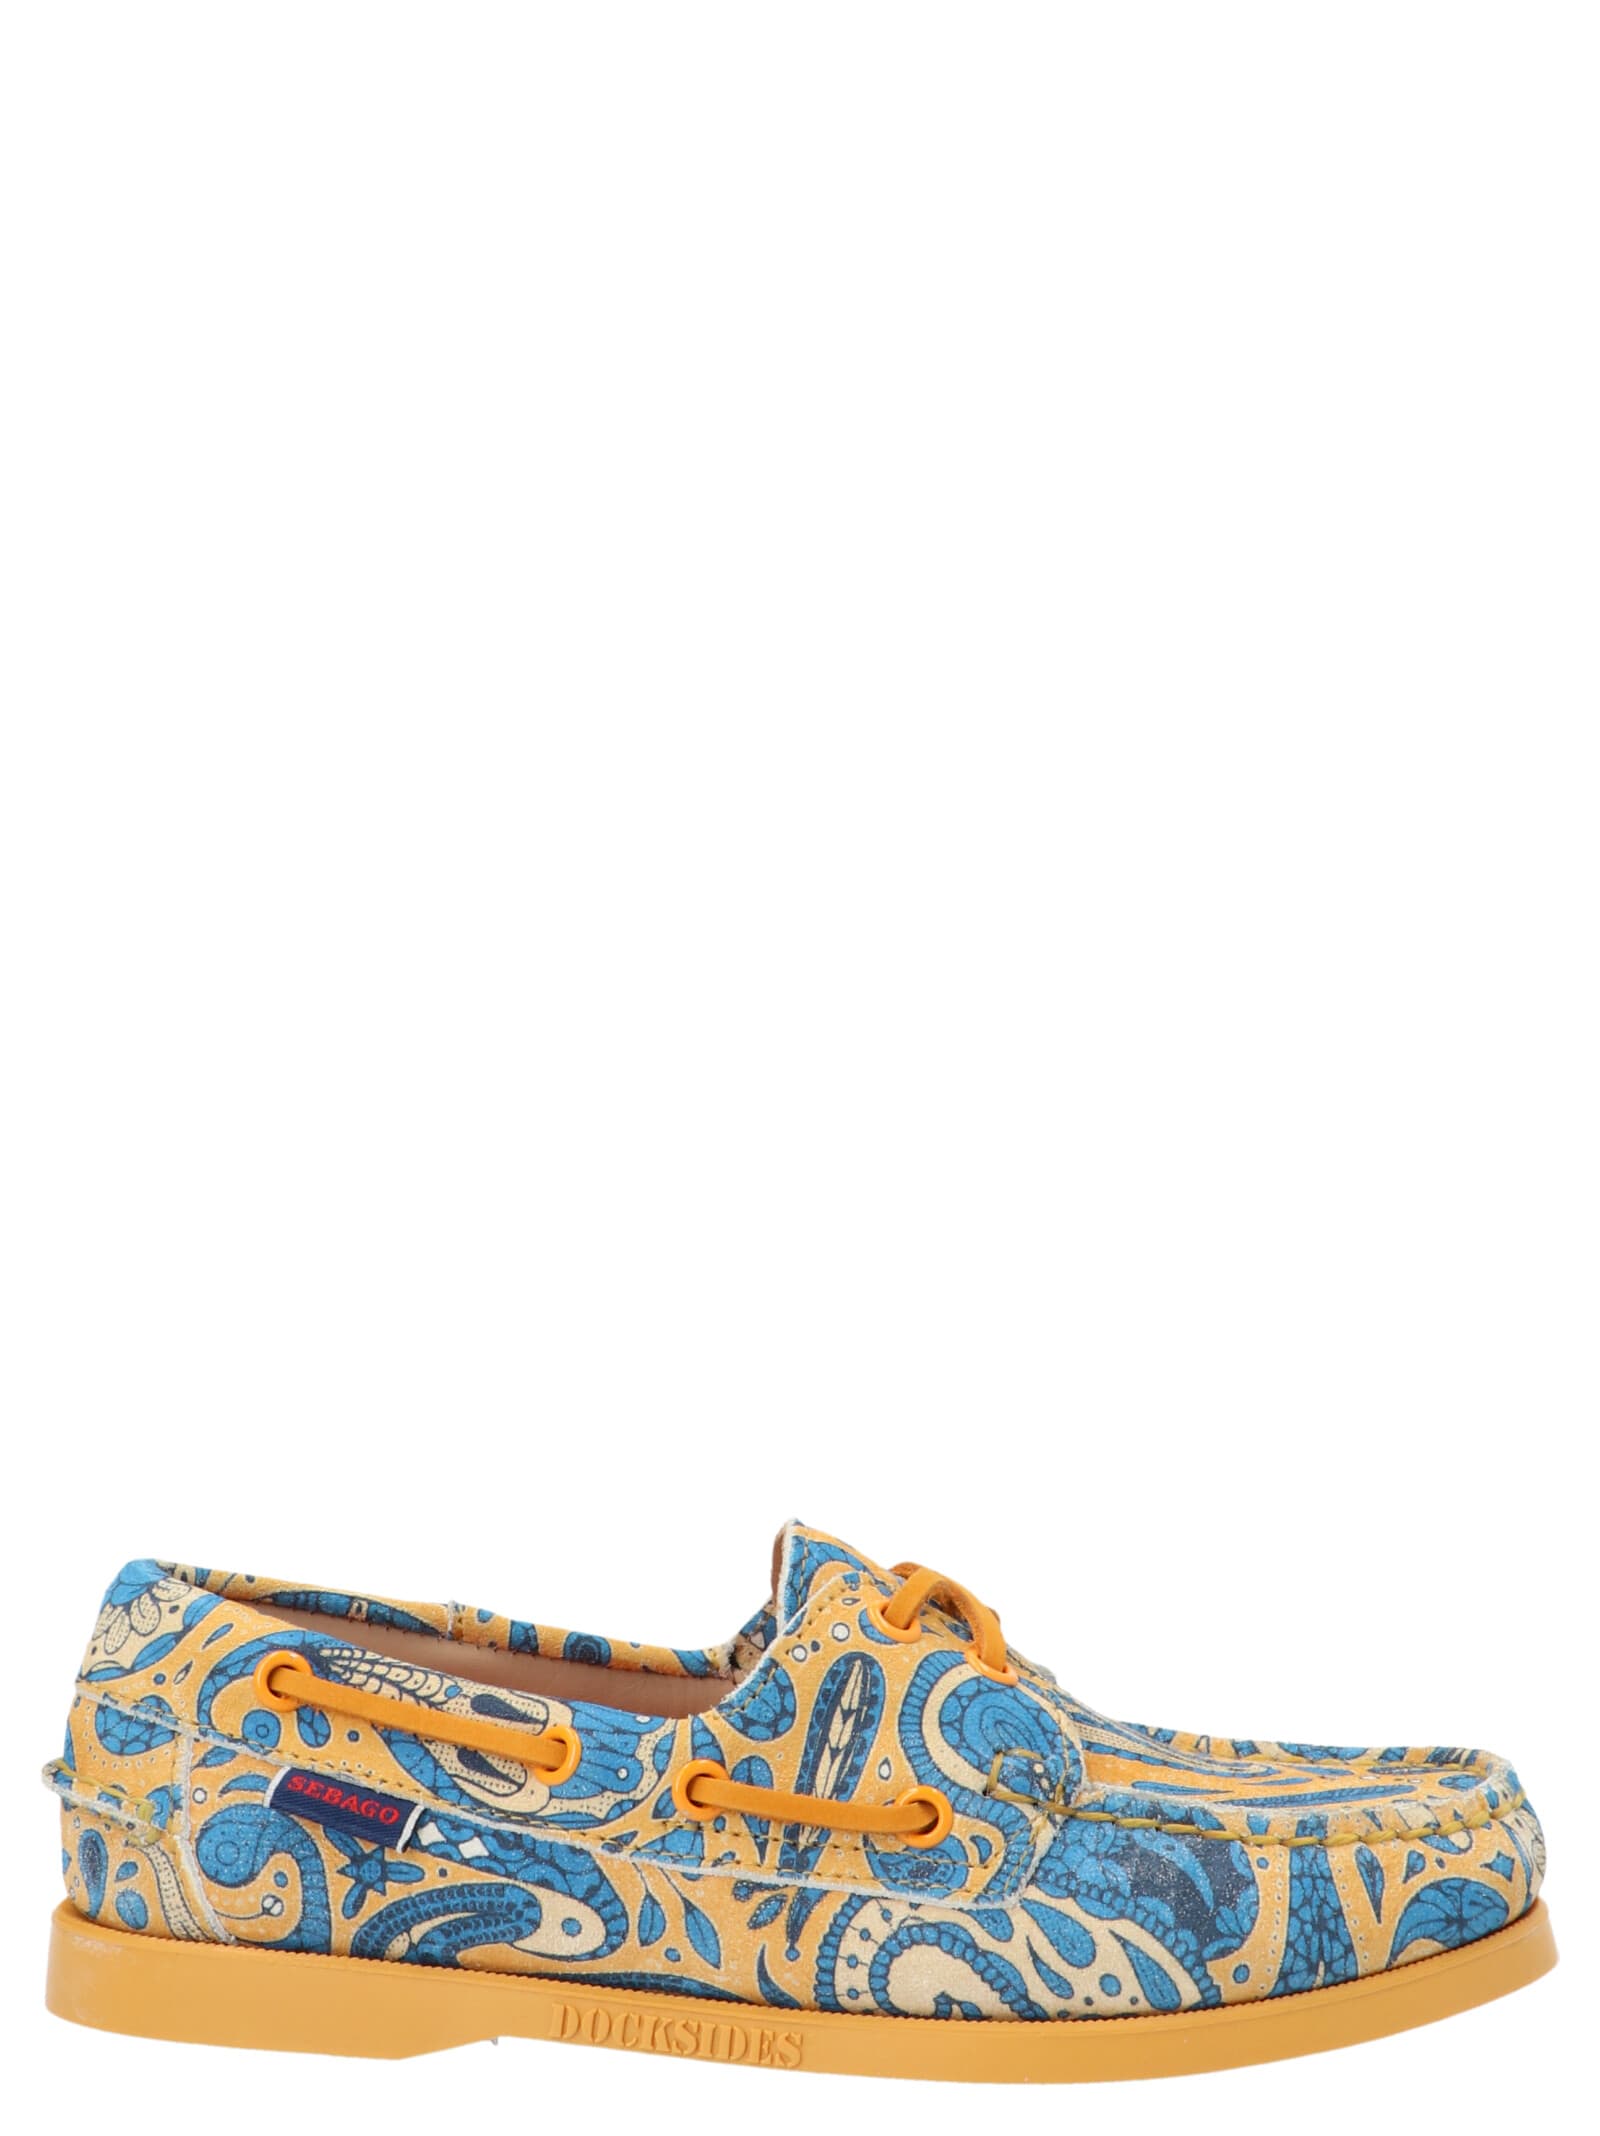 Docksides Paisley Women's Boat Shoes Sebago Purchase On, 50% OFF